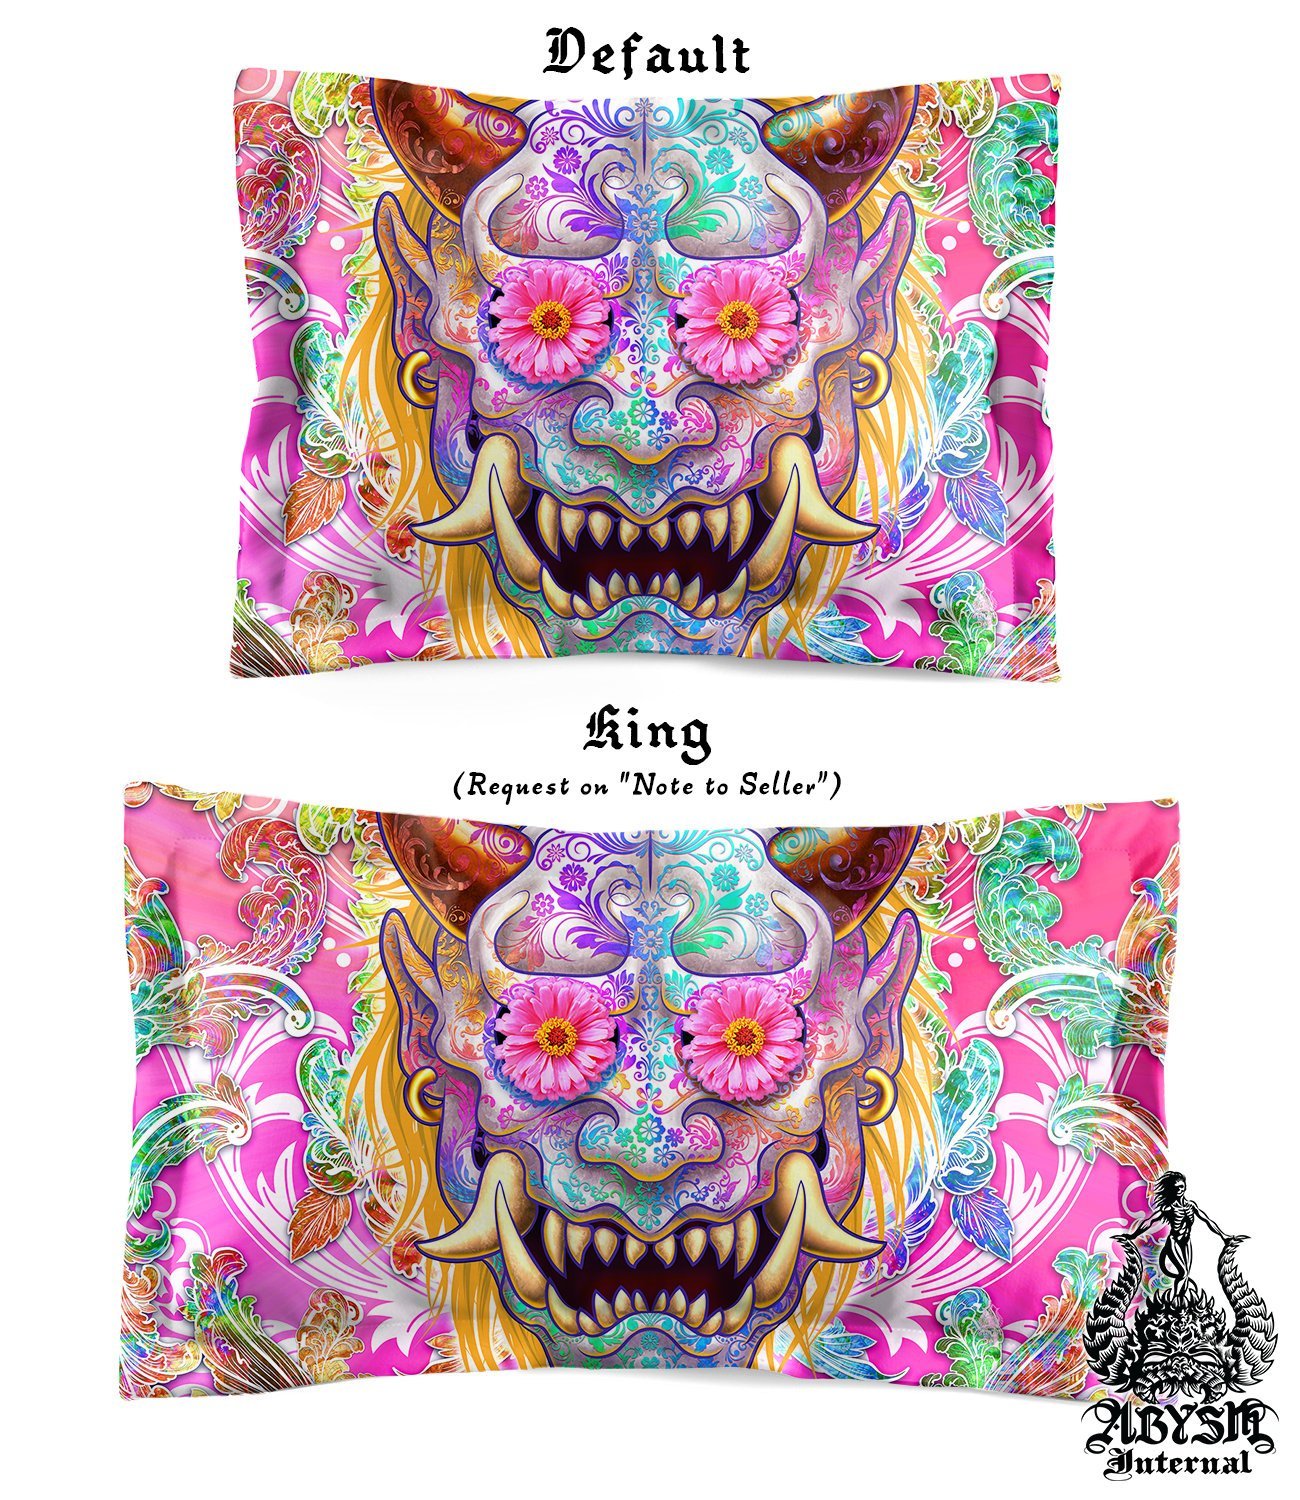 Psychedelic Bedding Set, Comforter and Duvet, Indie Indie Bed Cover and Bedroom Decor, King, Queen and Twin Size - Psy Oni, Japanese Demon - Abysm Internal